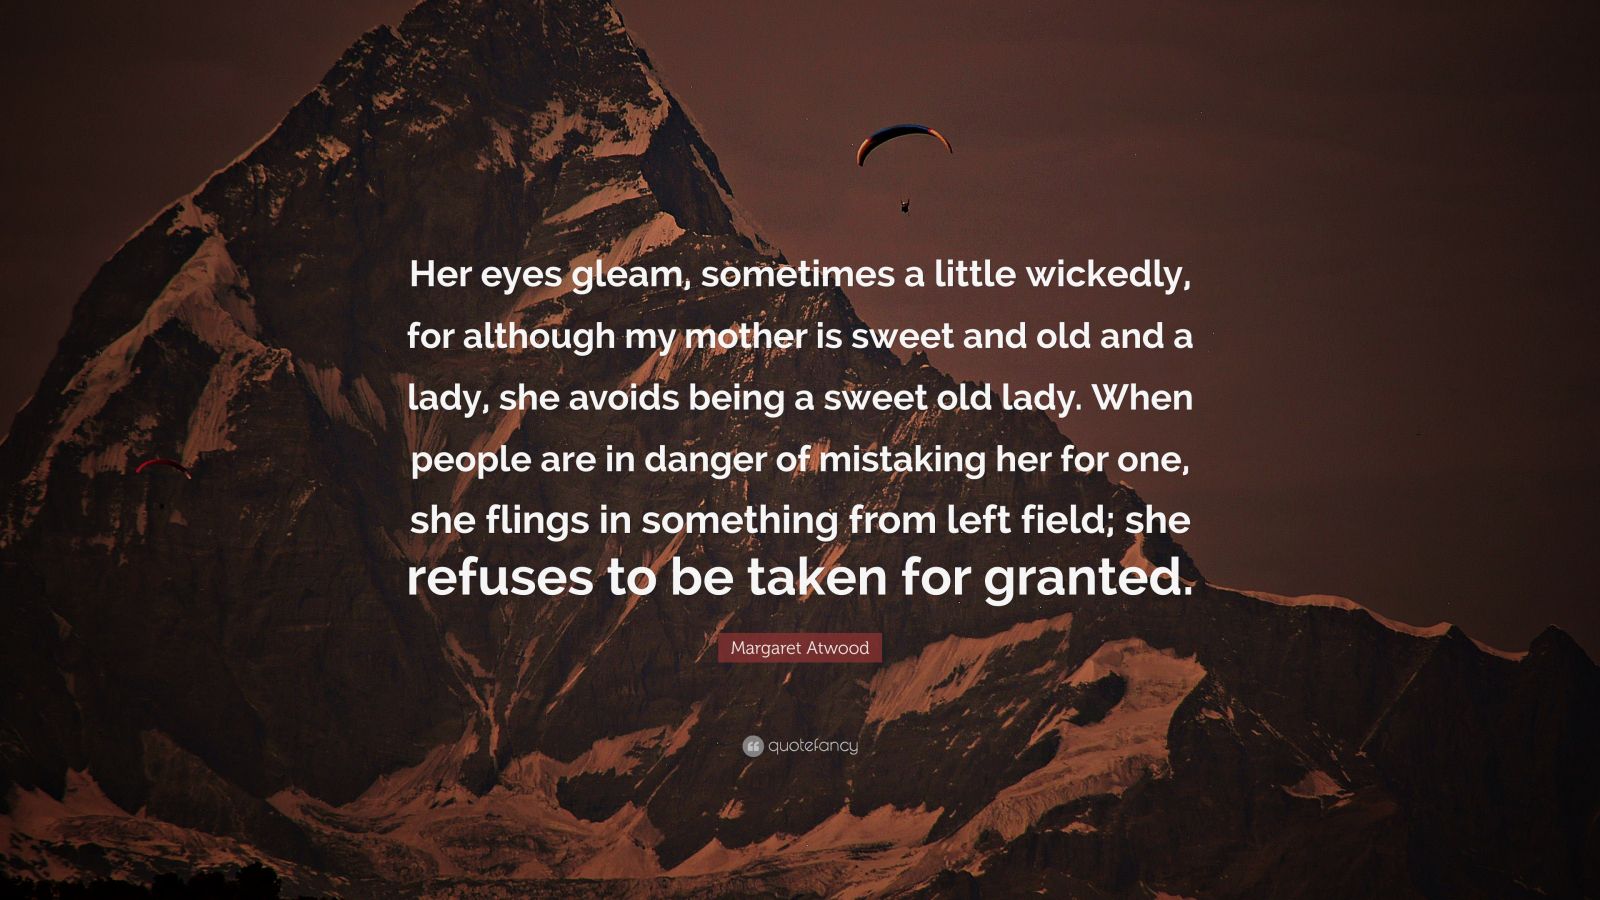 Margaret Atwood Quote: “Her eyes gleam, sometimes a little wickedly ...